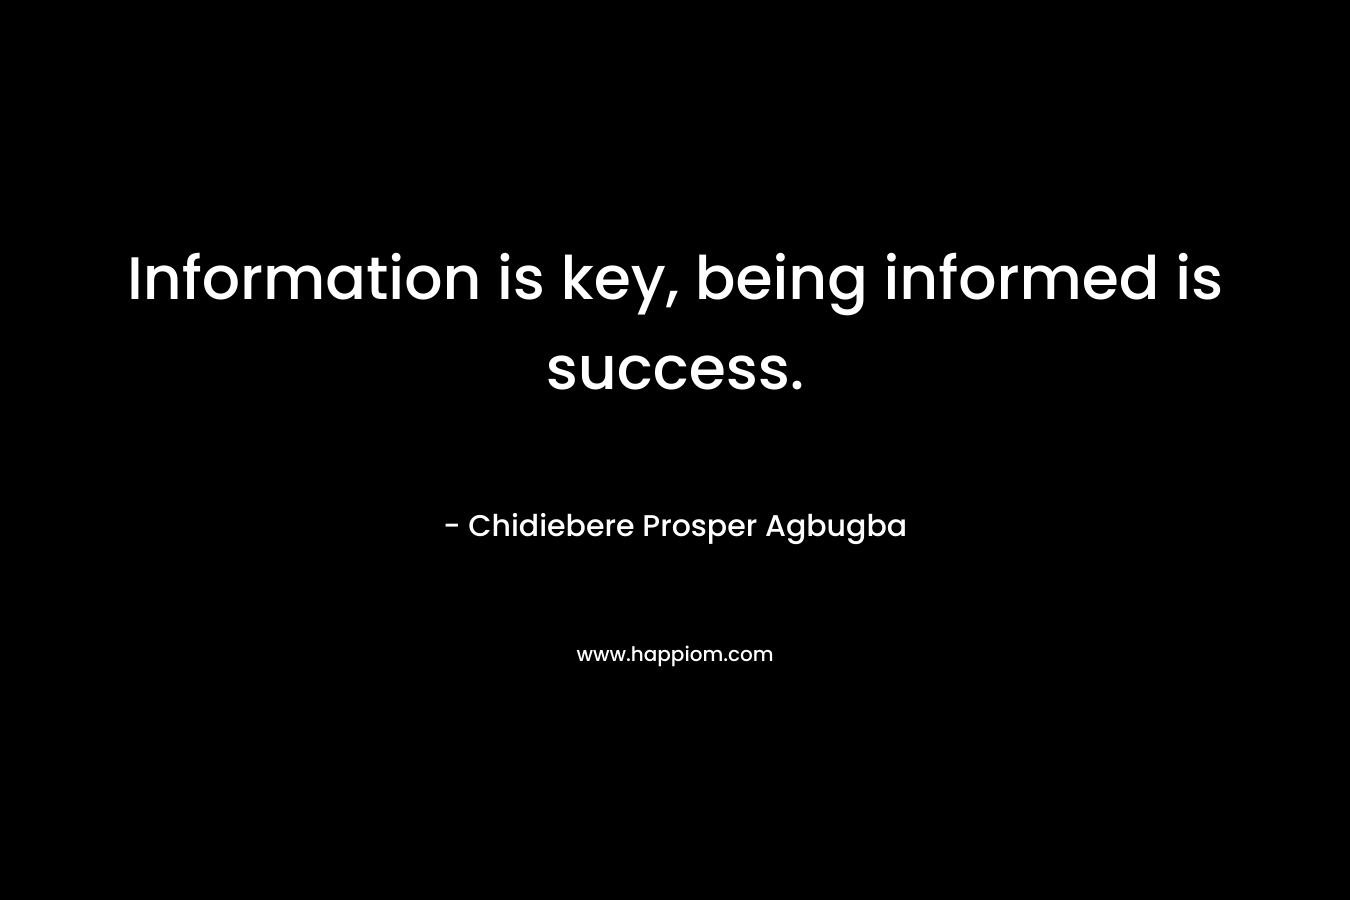 Information is key, being informed is success.